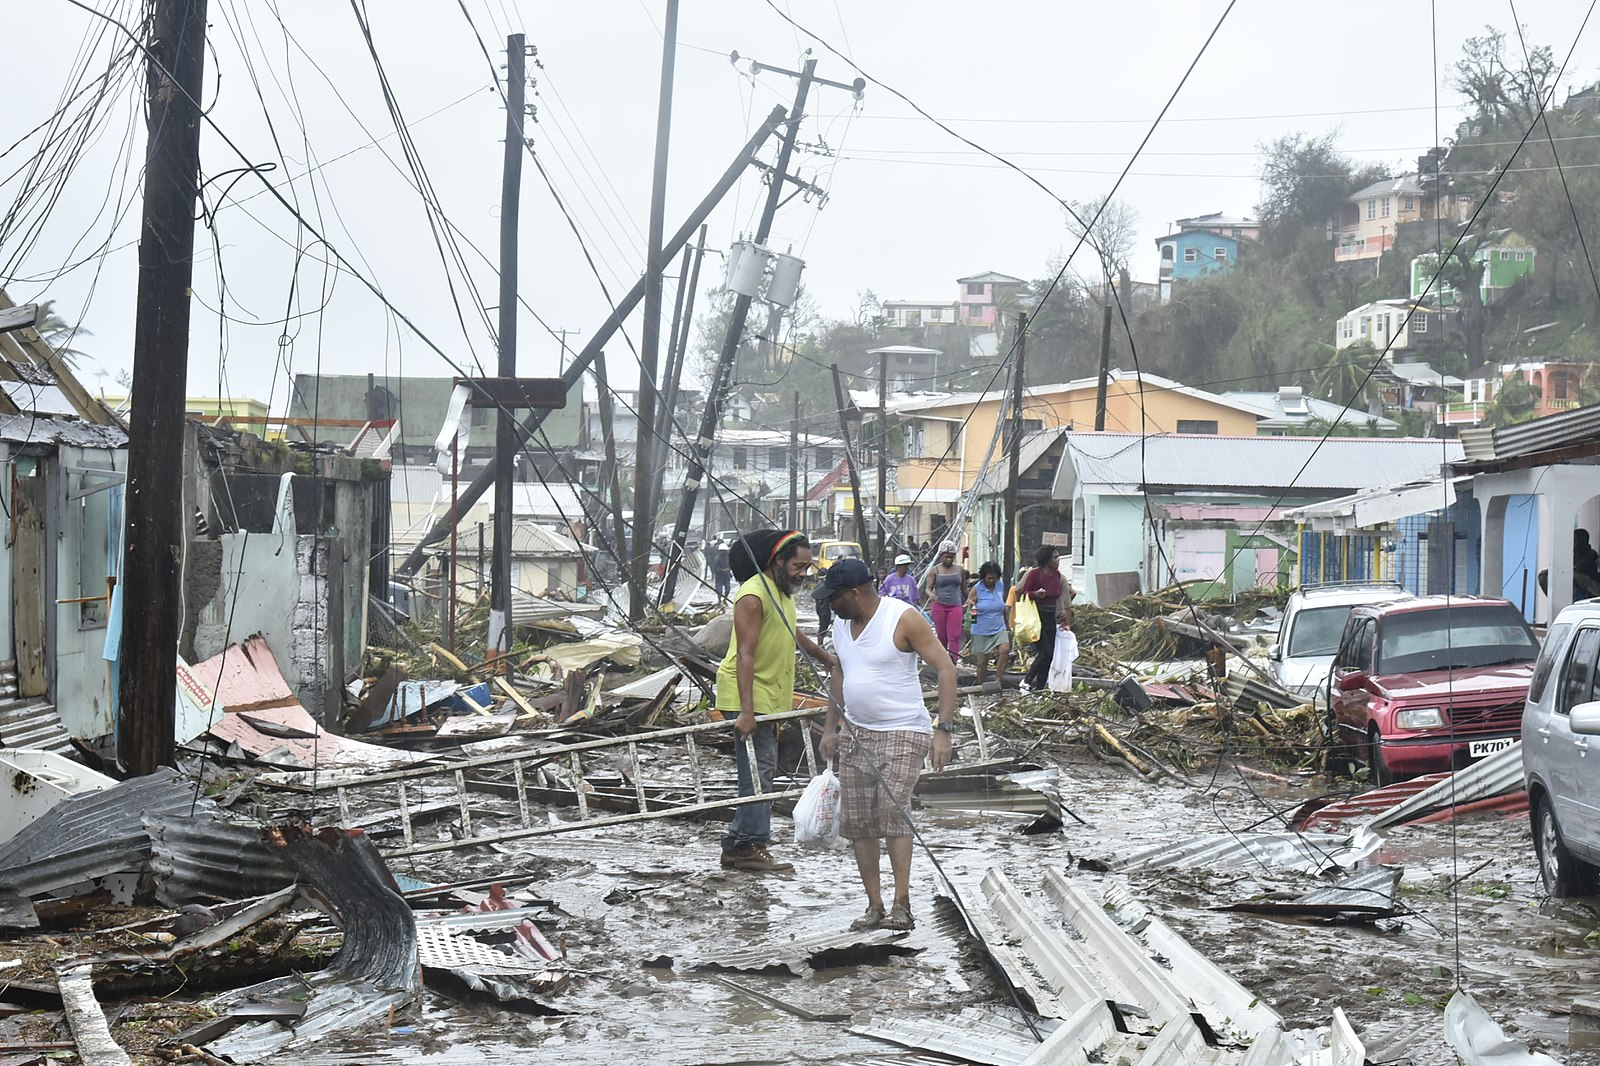 People walking through a street that was destroyed by Hurricane Maria